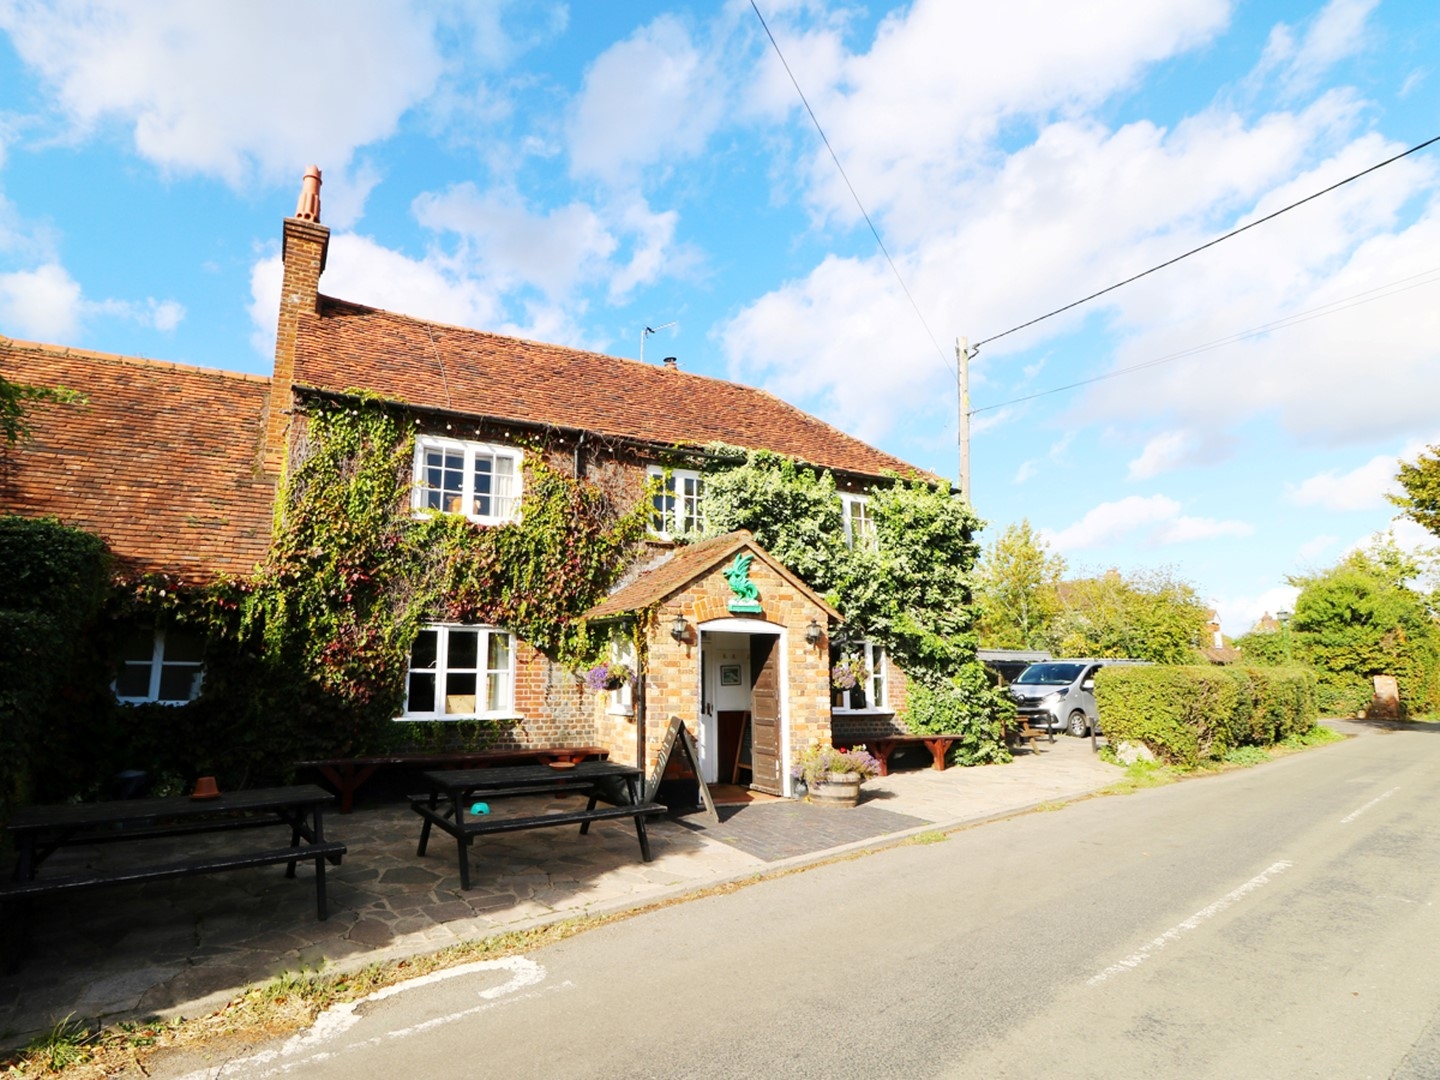 Family Owned Hertfordshire Pub Sold Following 100 Years Of Ownership